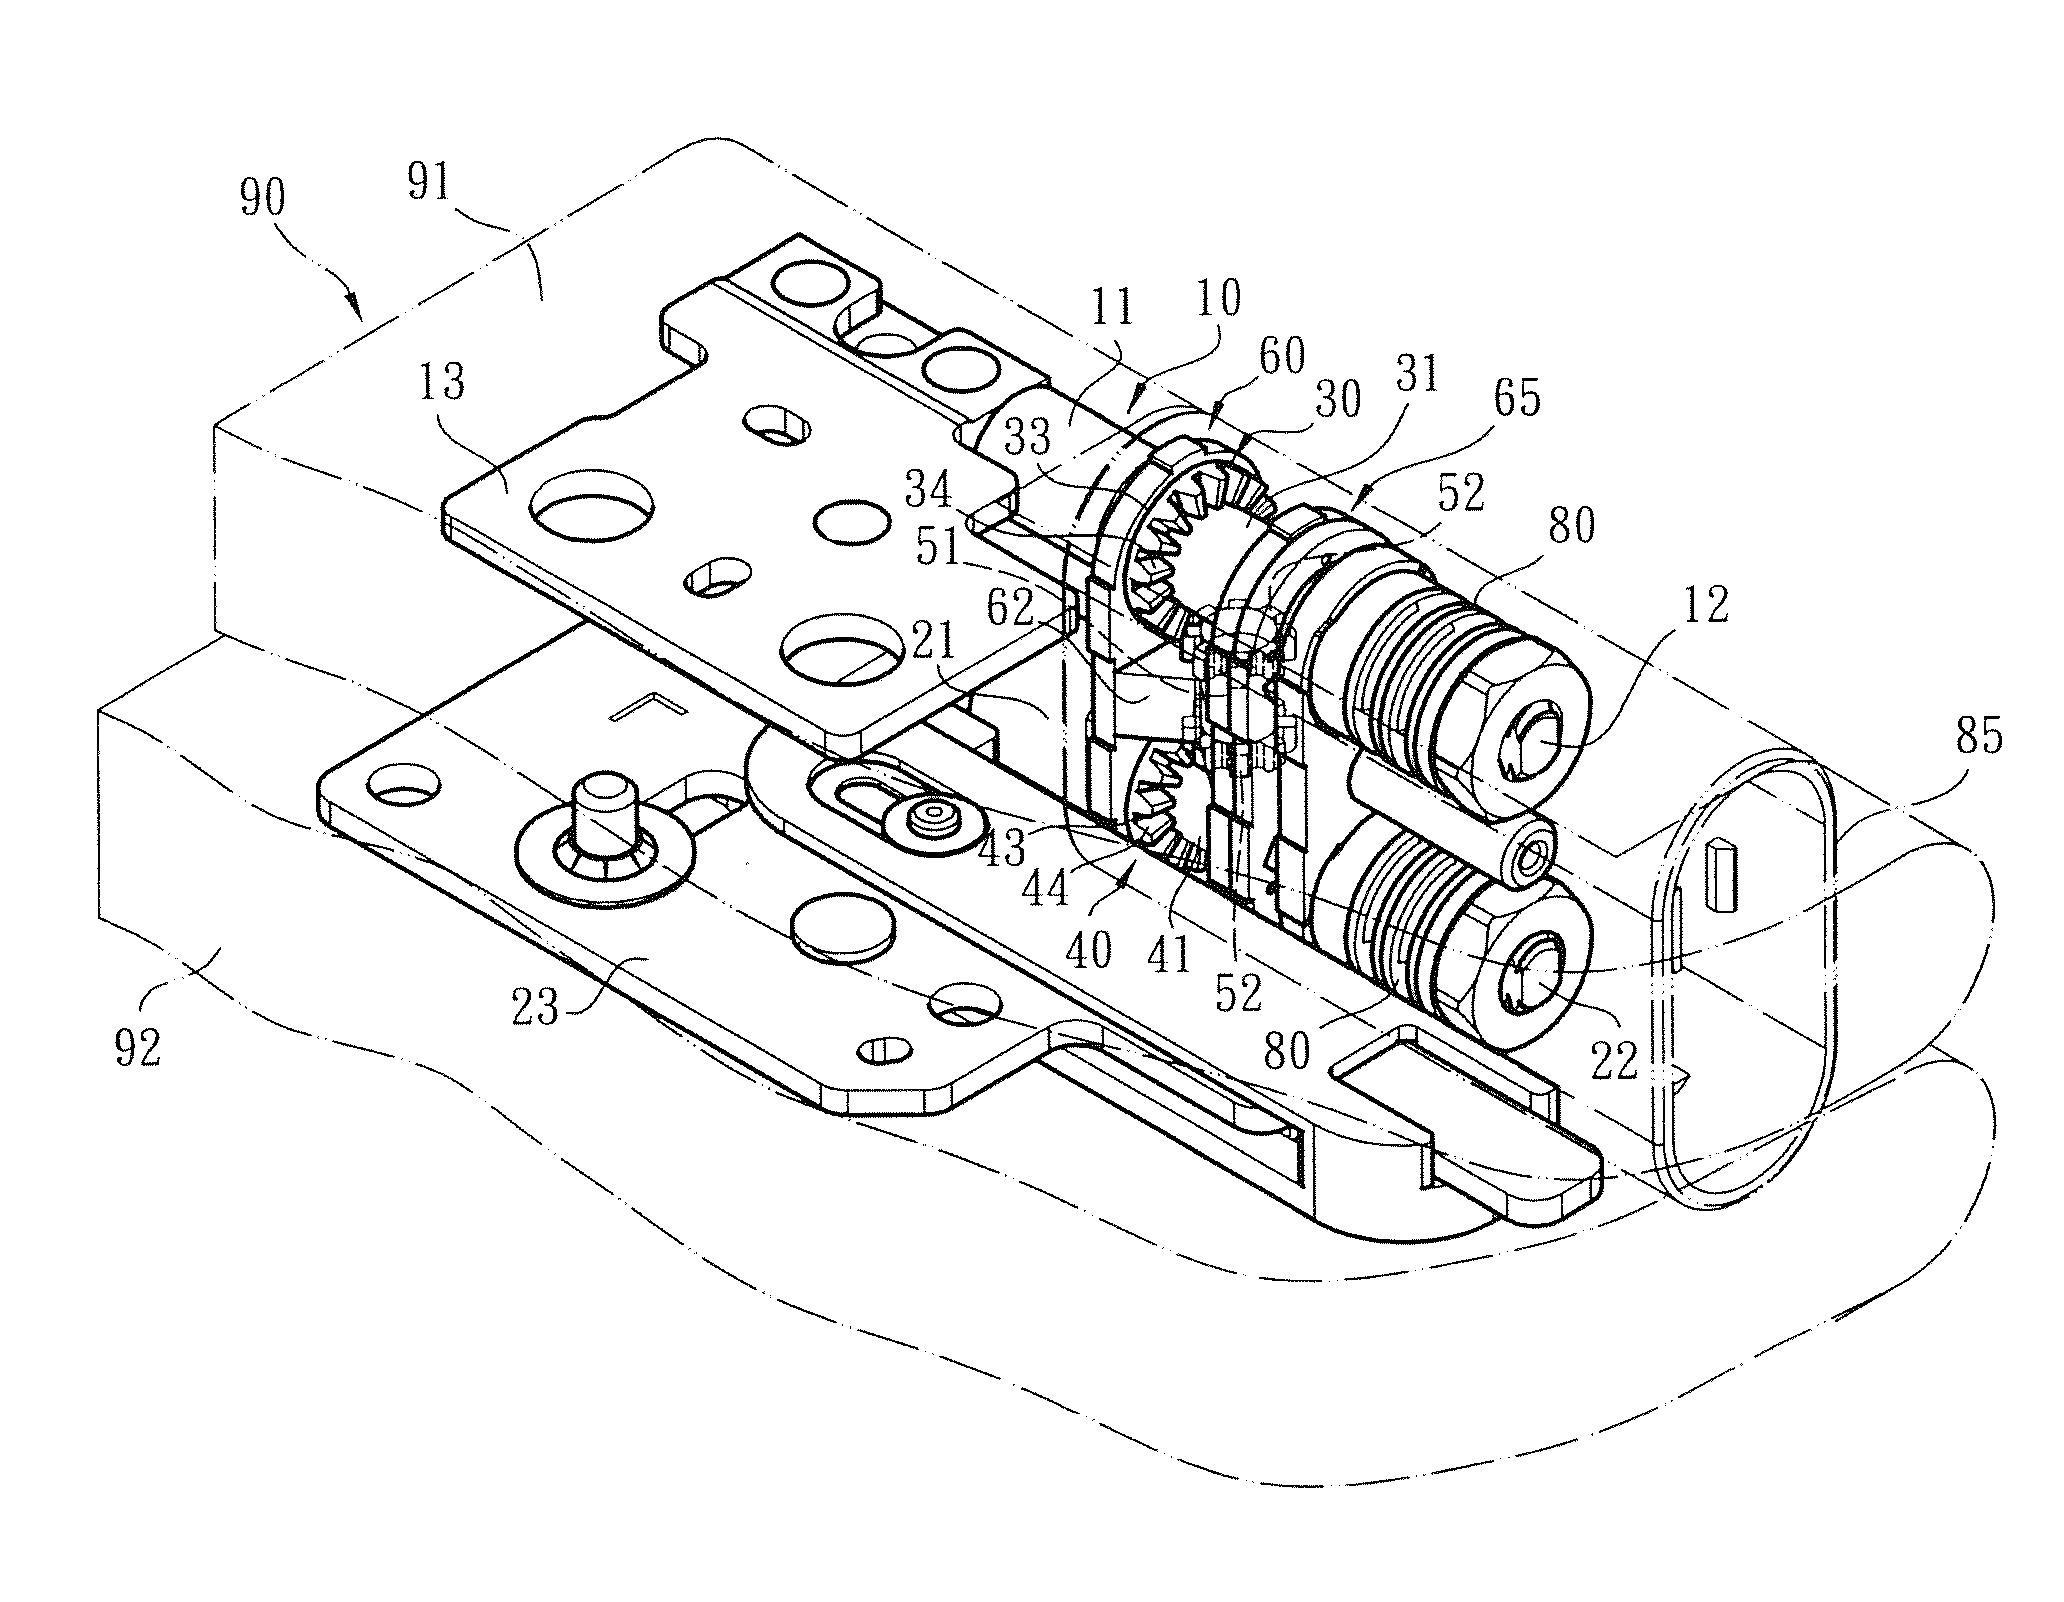 Dual-shaft synchronous transmission device